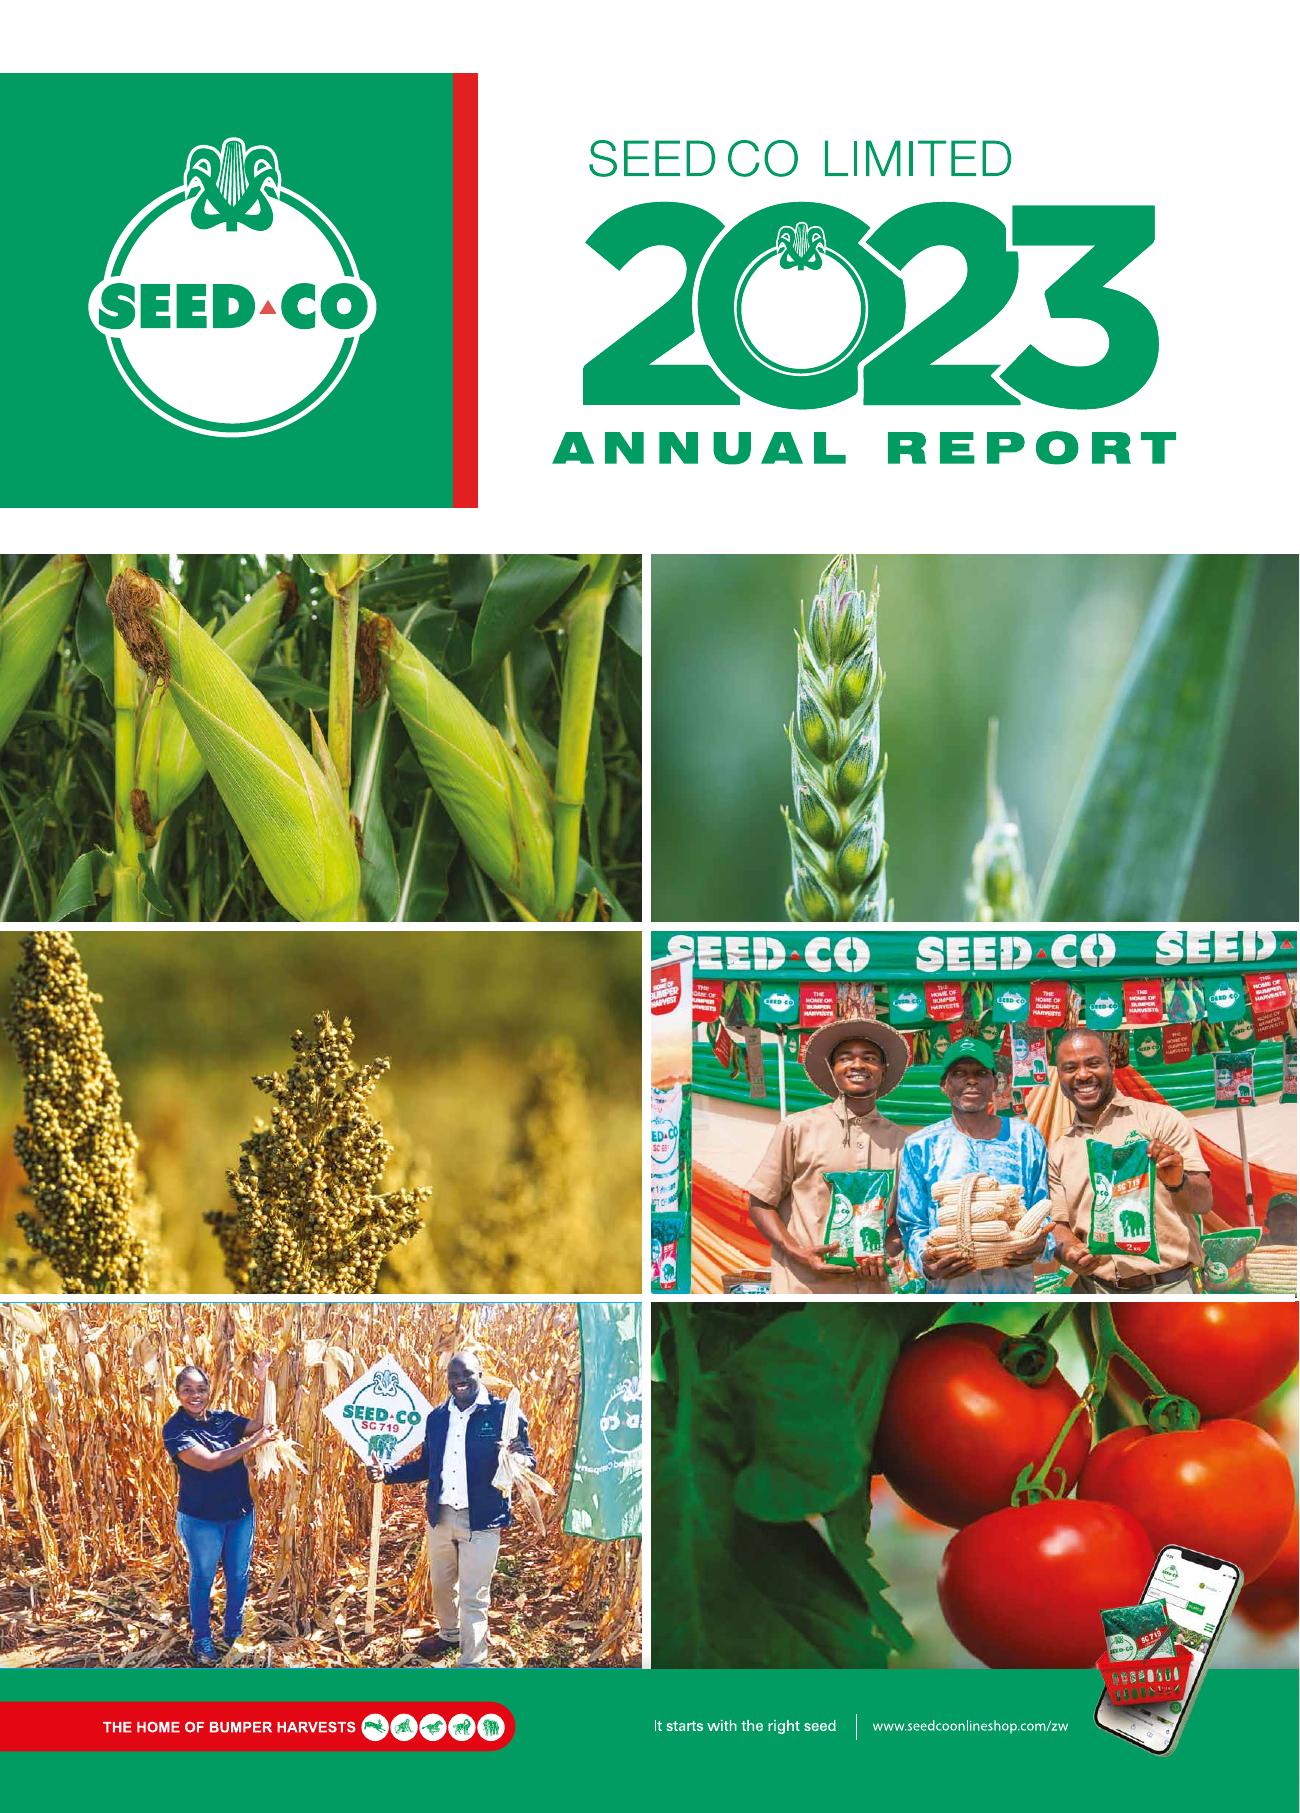 SEEDCOGROUP 2023 Annual Report